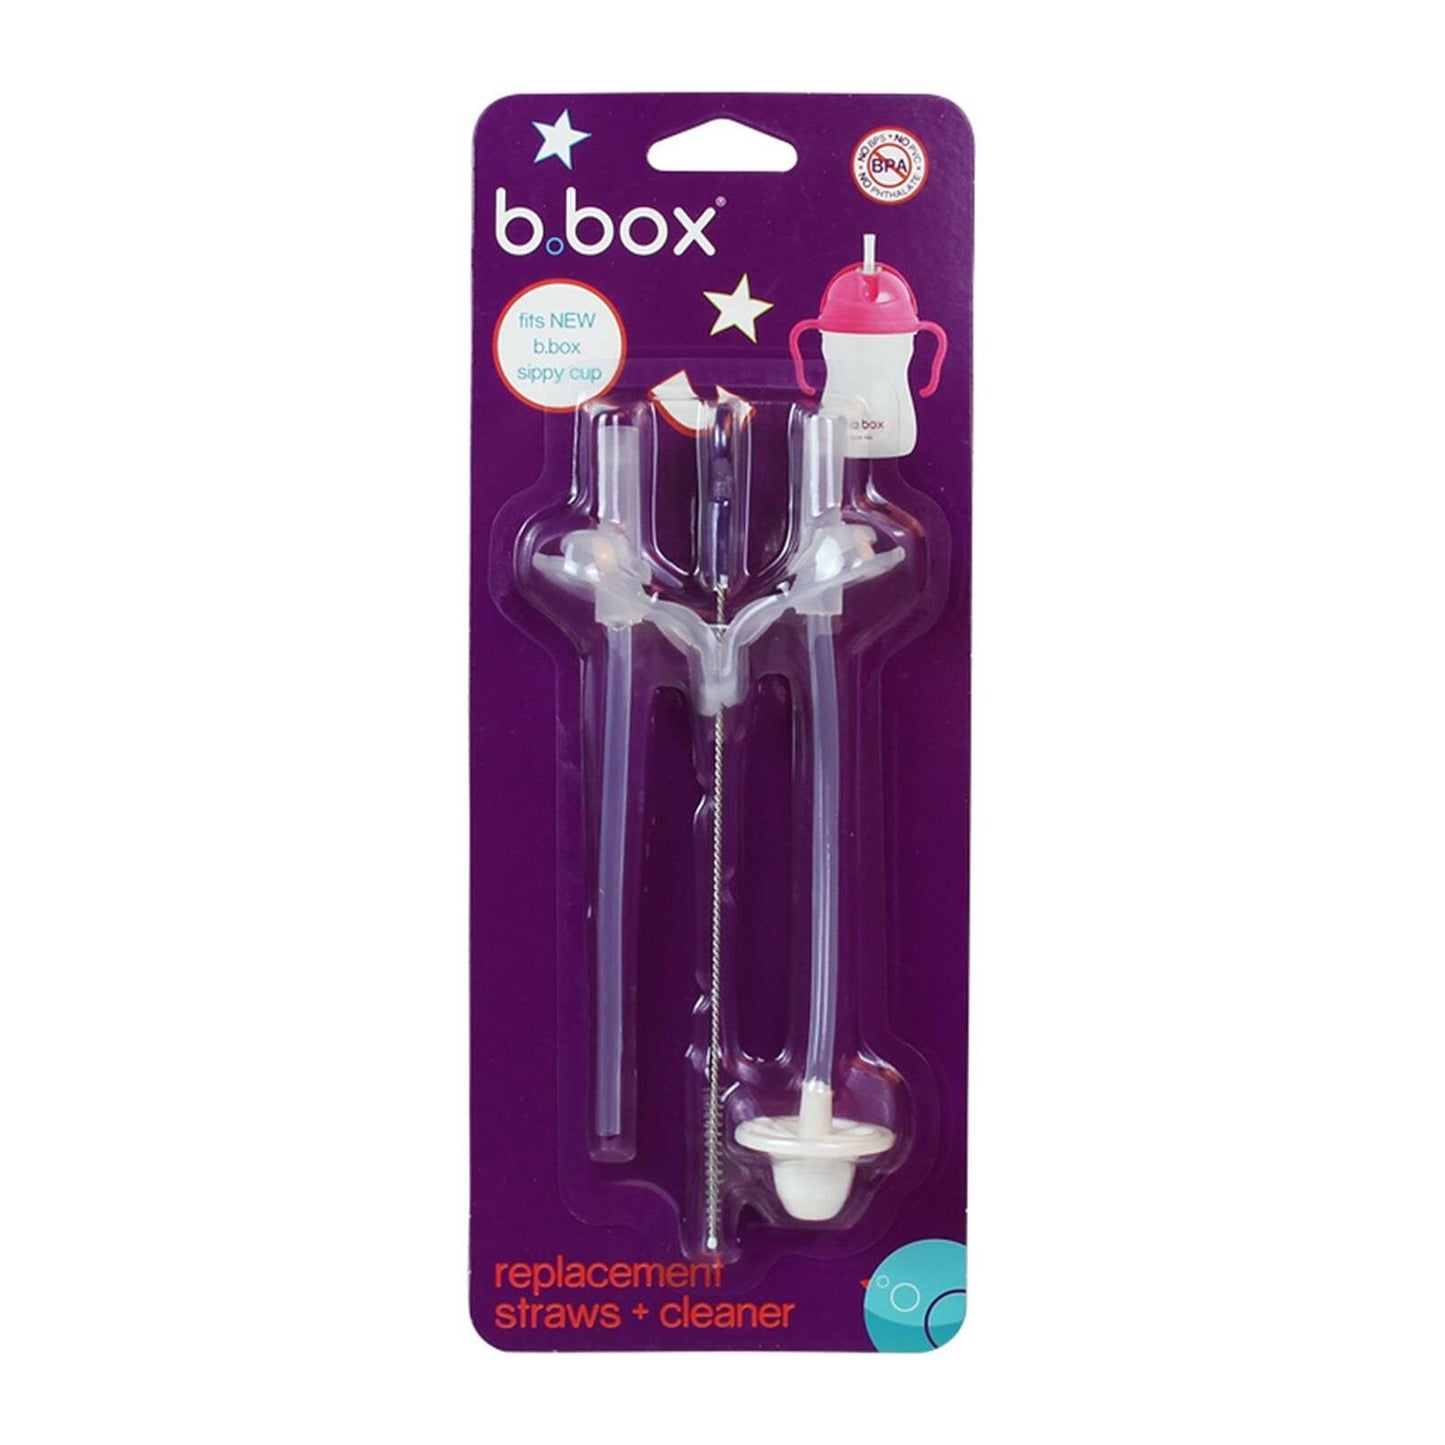 b.box Replacement Straw & Cleaner